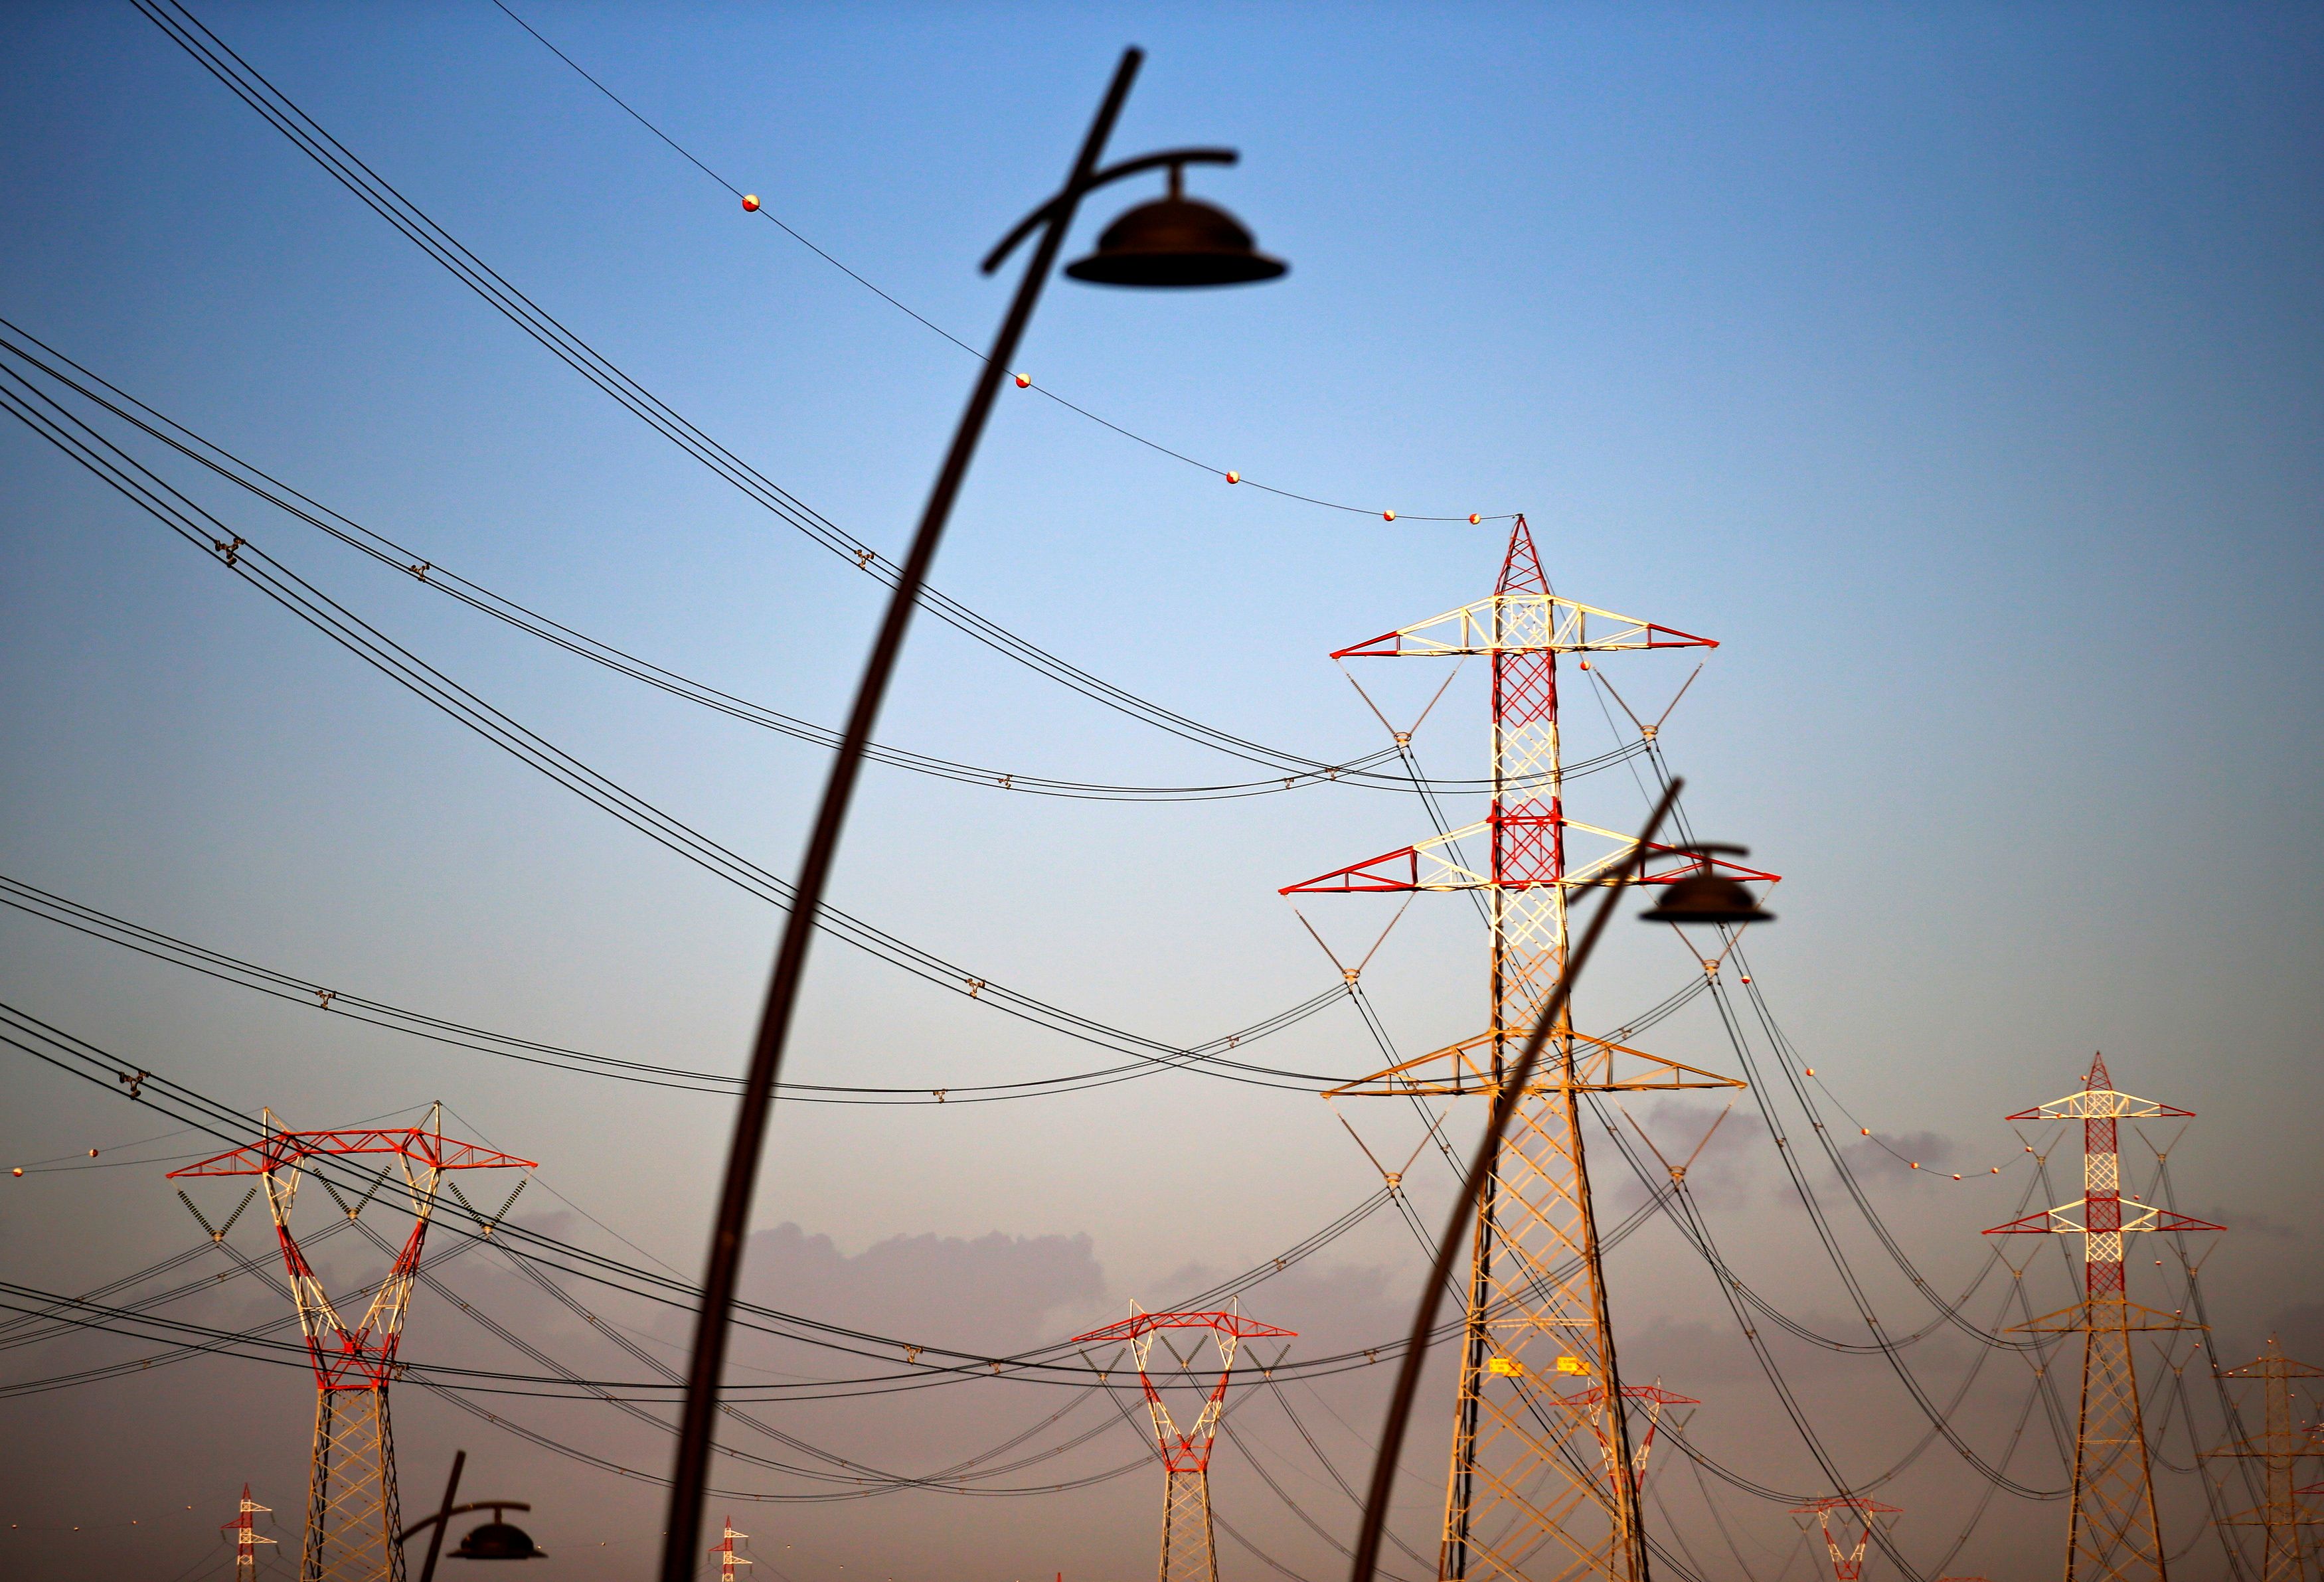 Power lines connecting pylons of high-tension electricity are seen in Montalto Di Castro